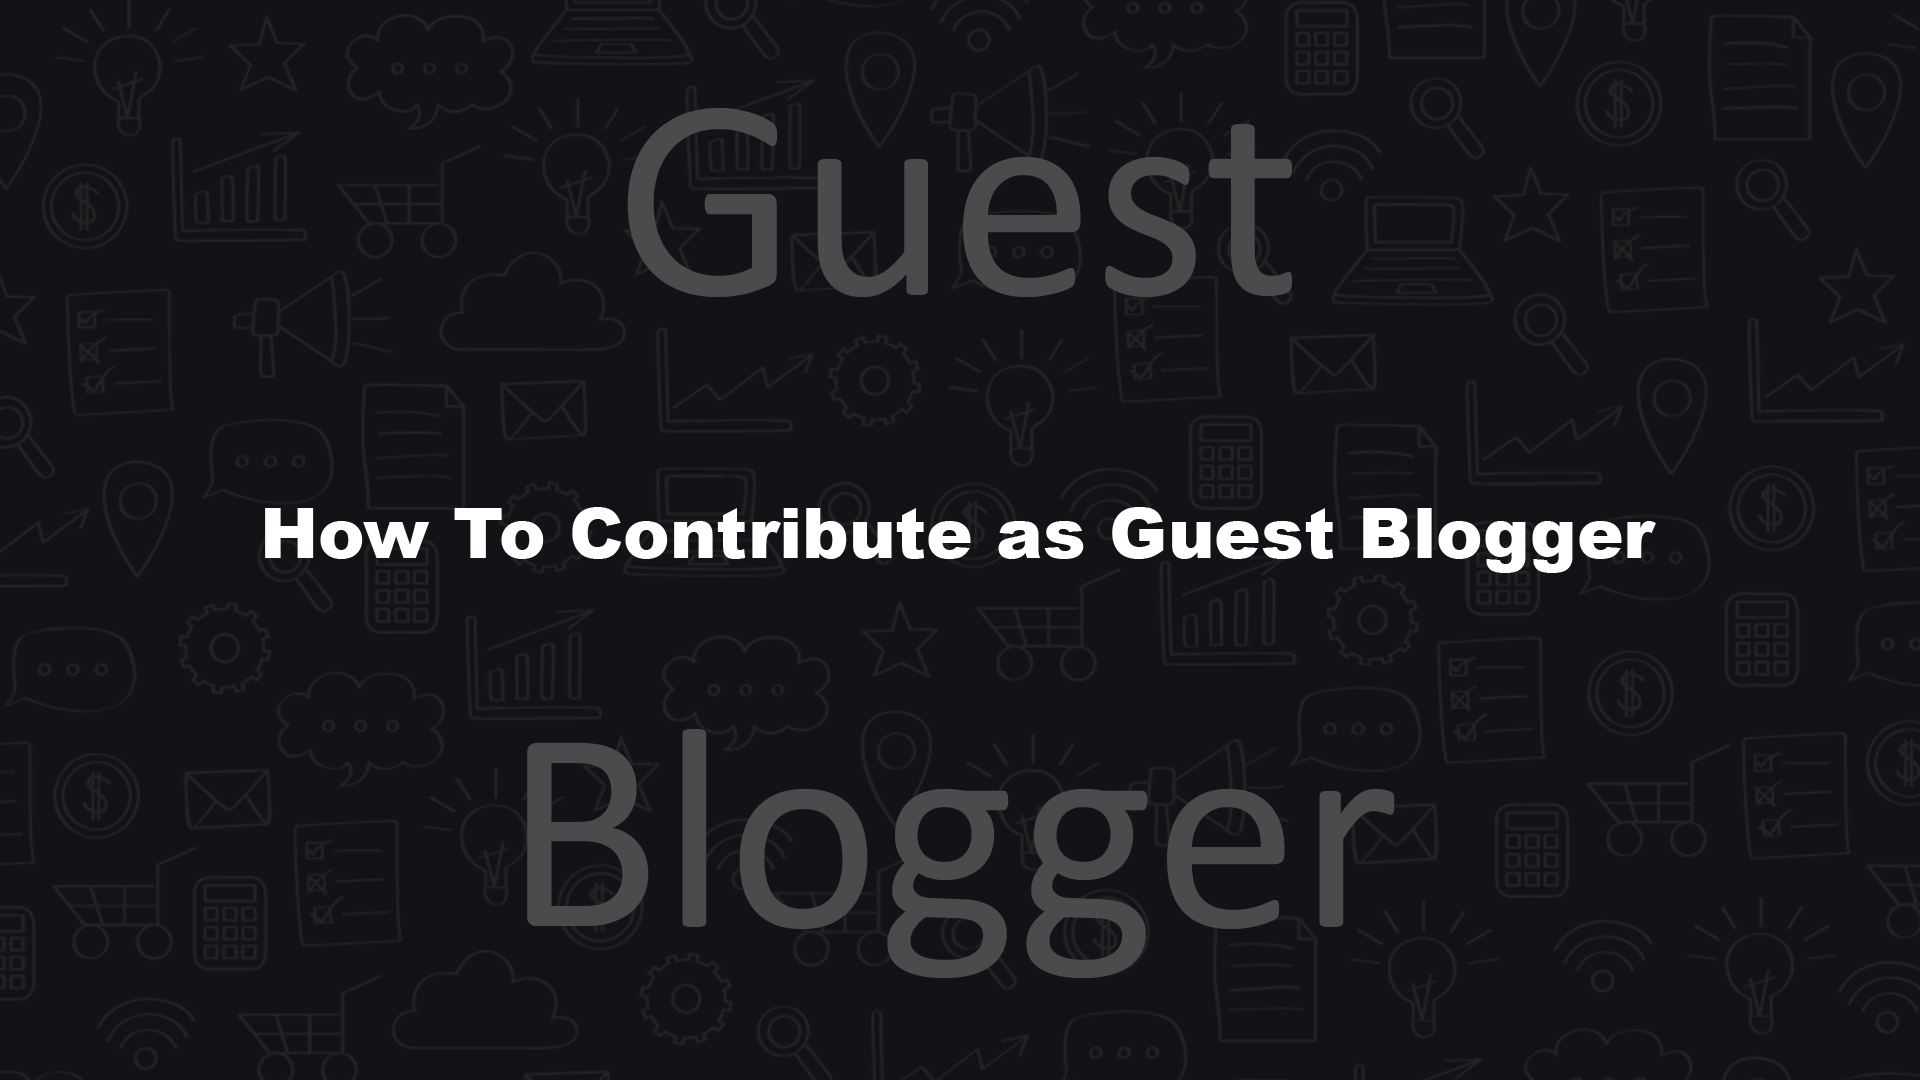 Contribute as Guest Blogger